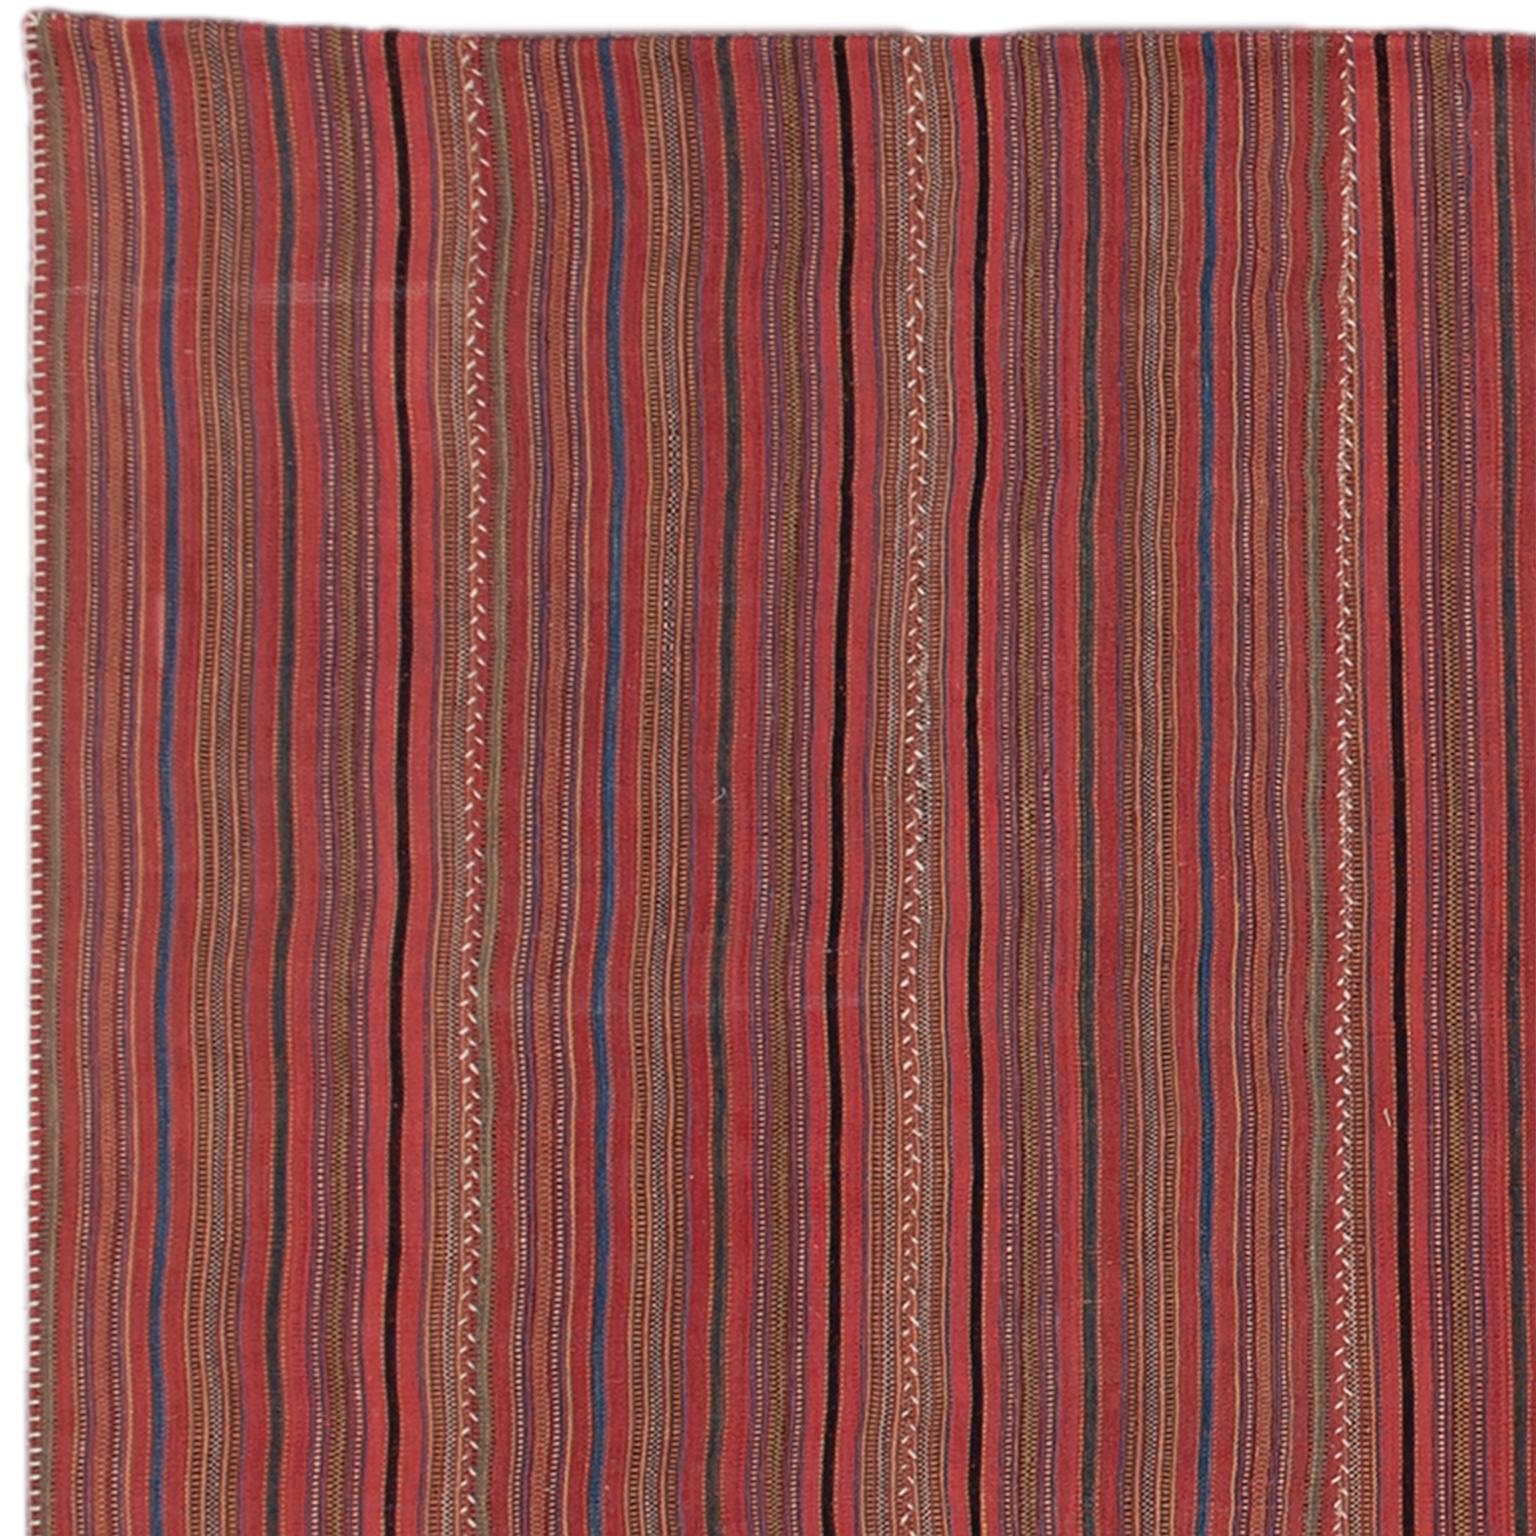 Vintage Kilim Composition composed of 10 Persian red striped panels (circa 1940), joined together with a stitch made of un-dyed linen.